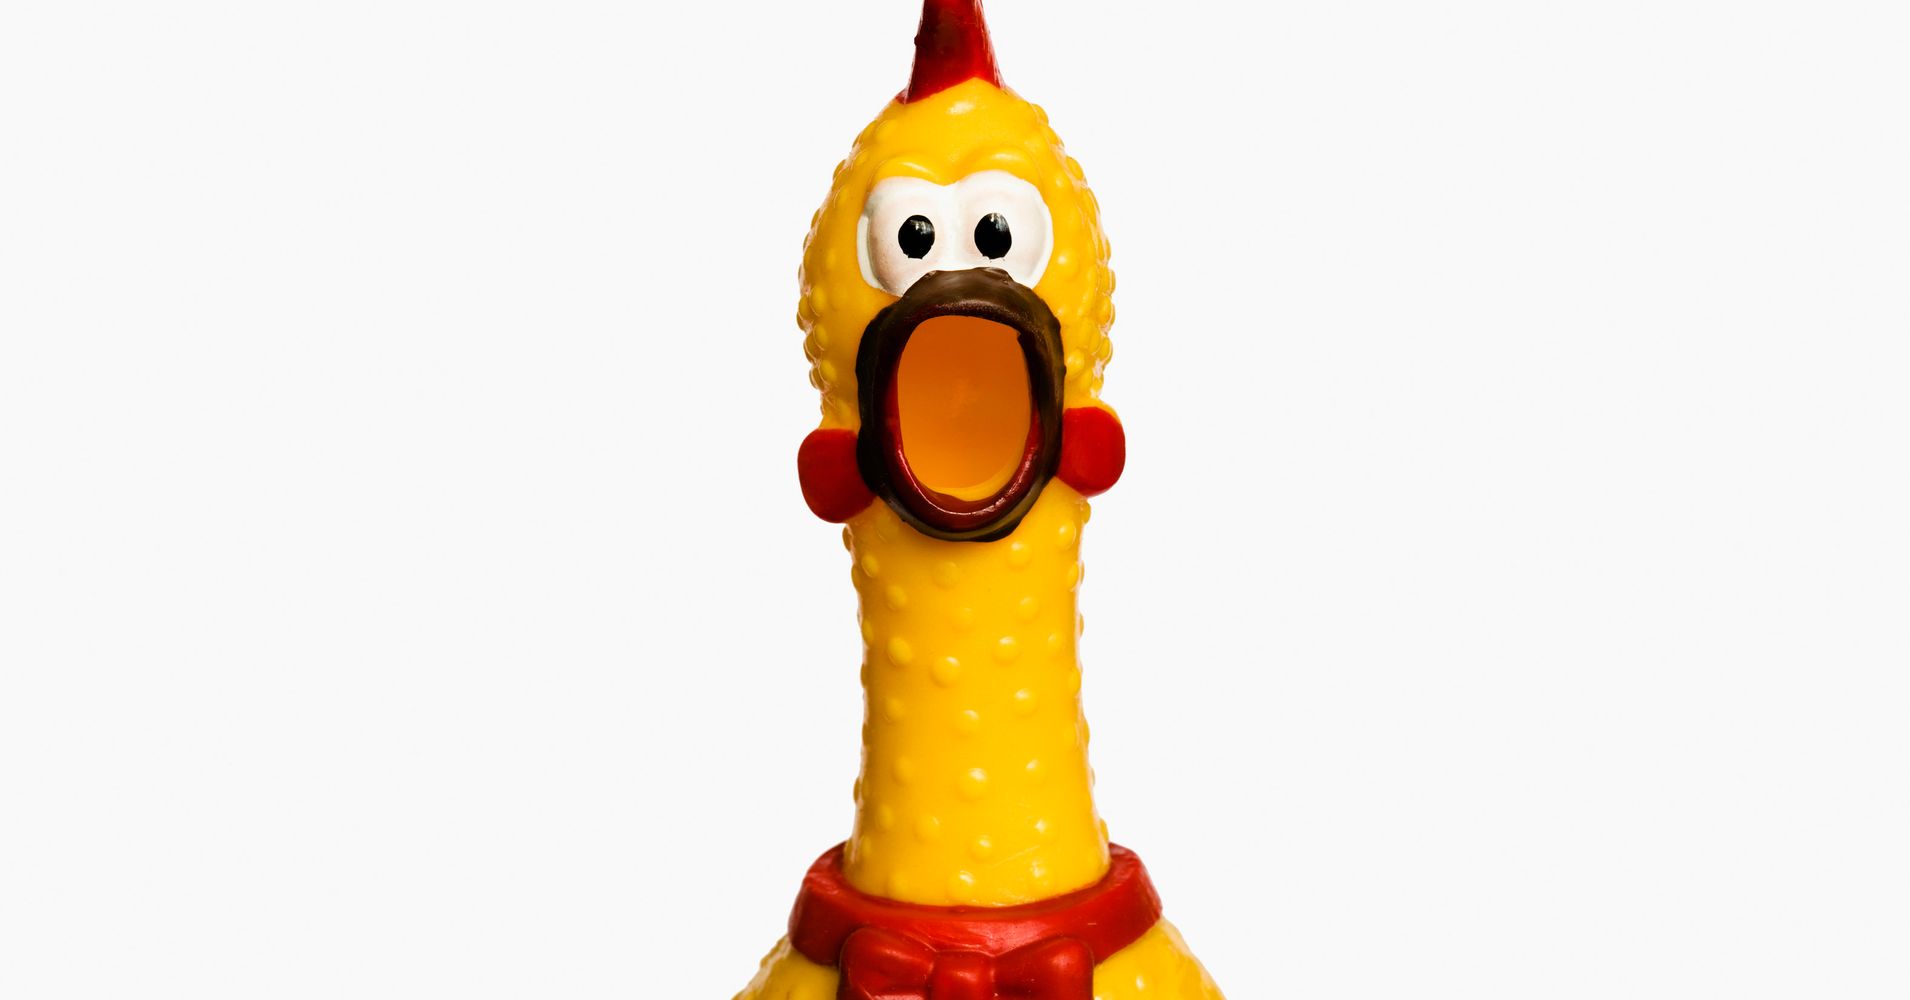 Rubber Chickens Bounce To The Beak In EDM-Style Banger | HuffPost